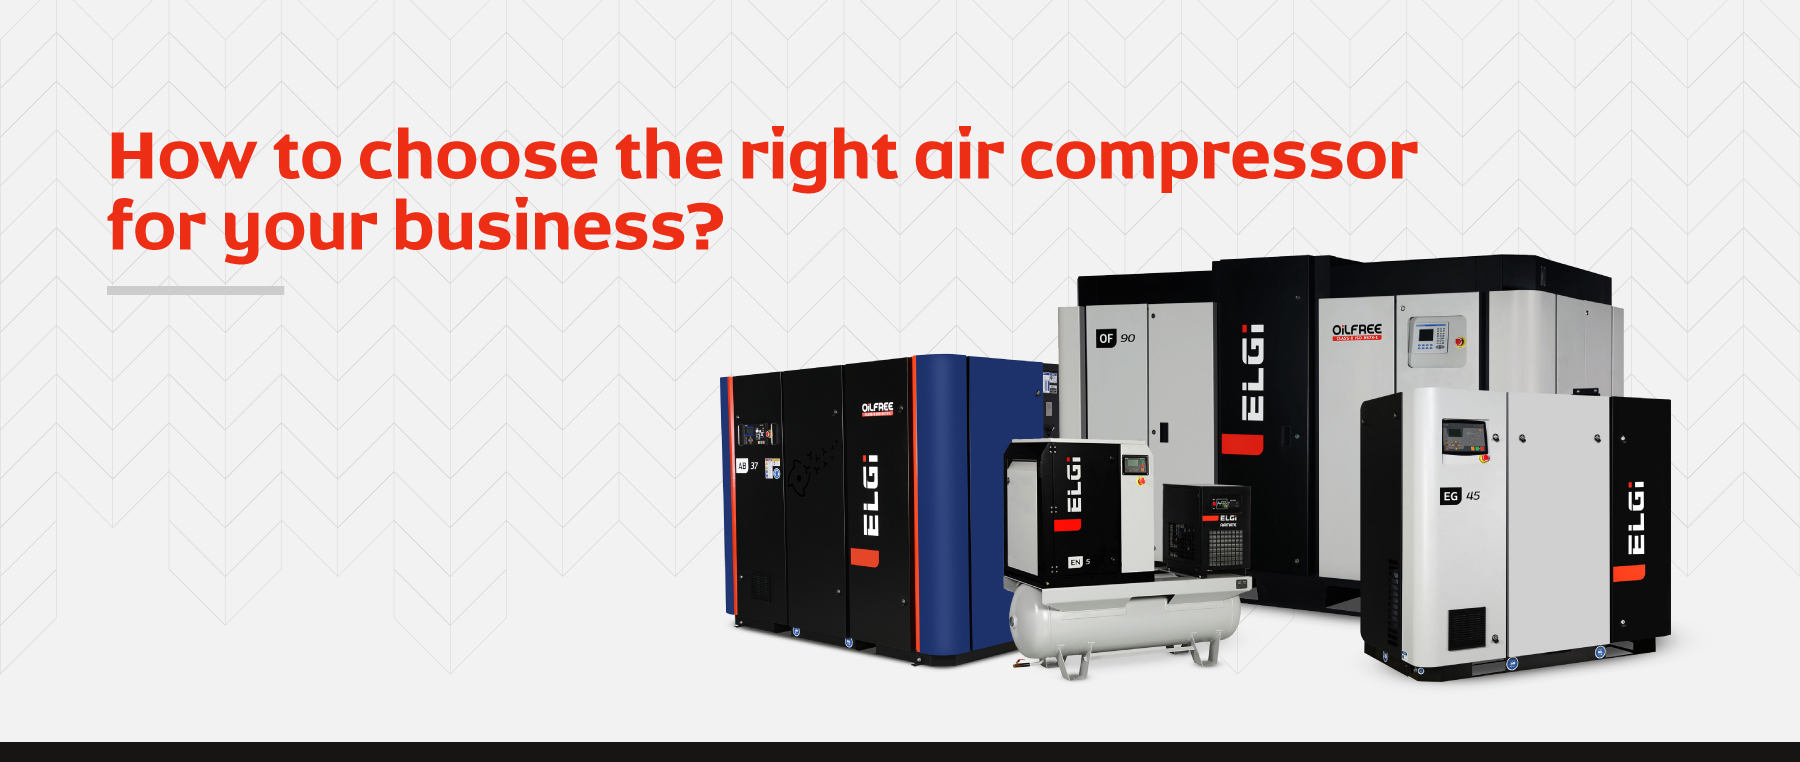 How to choose the right air compressor for your business?